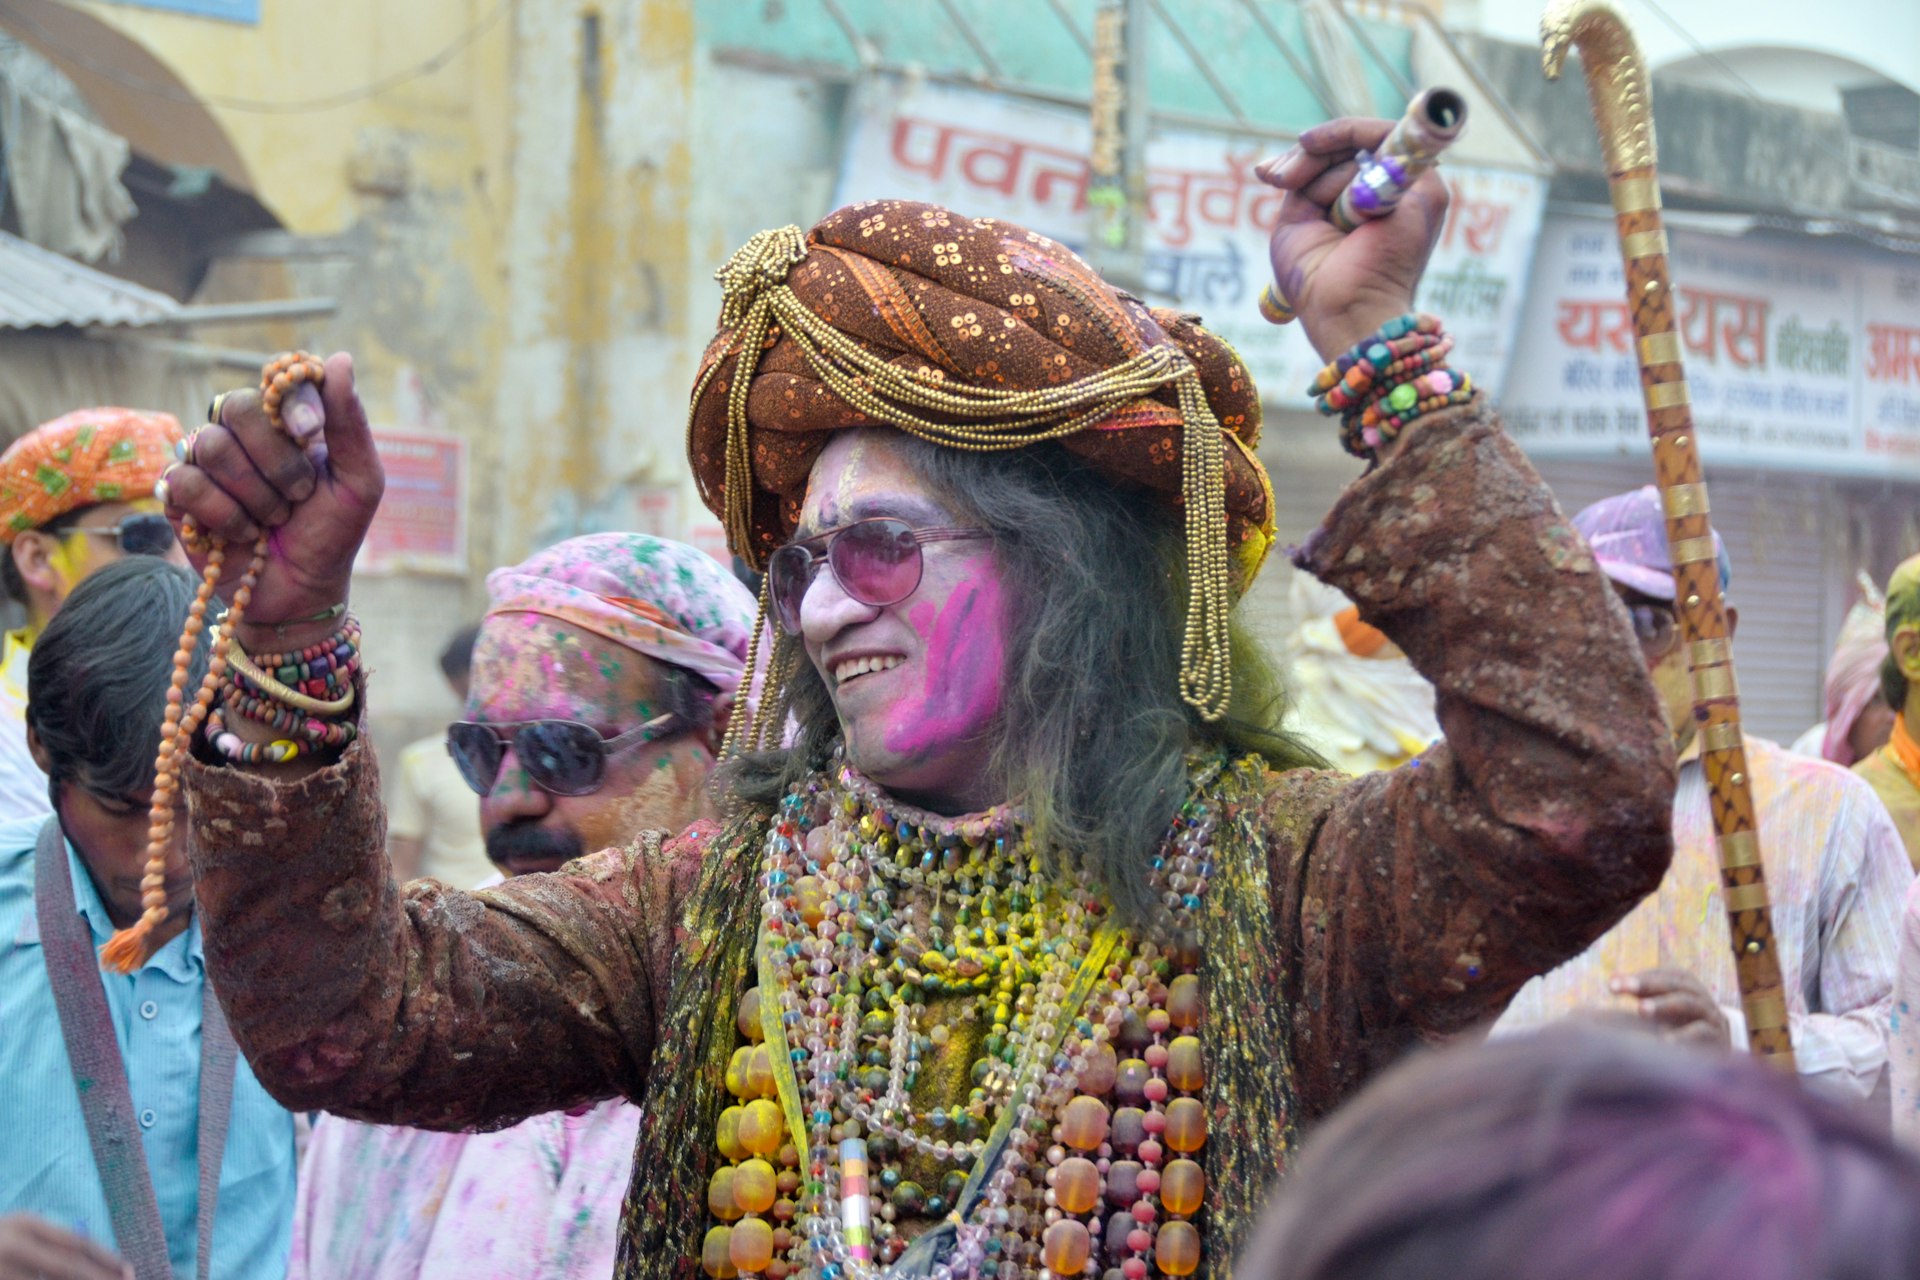 A man in sunglasses, covered in paint, takes part in the Holi festival in Mathura, India